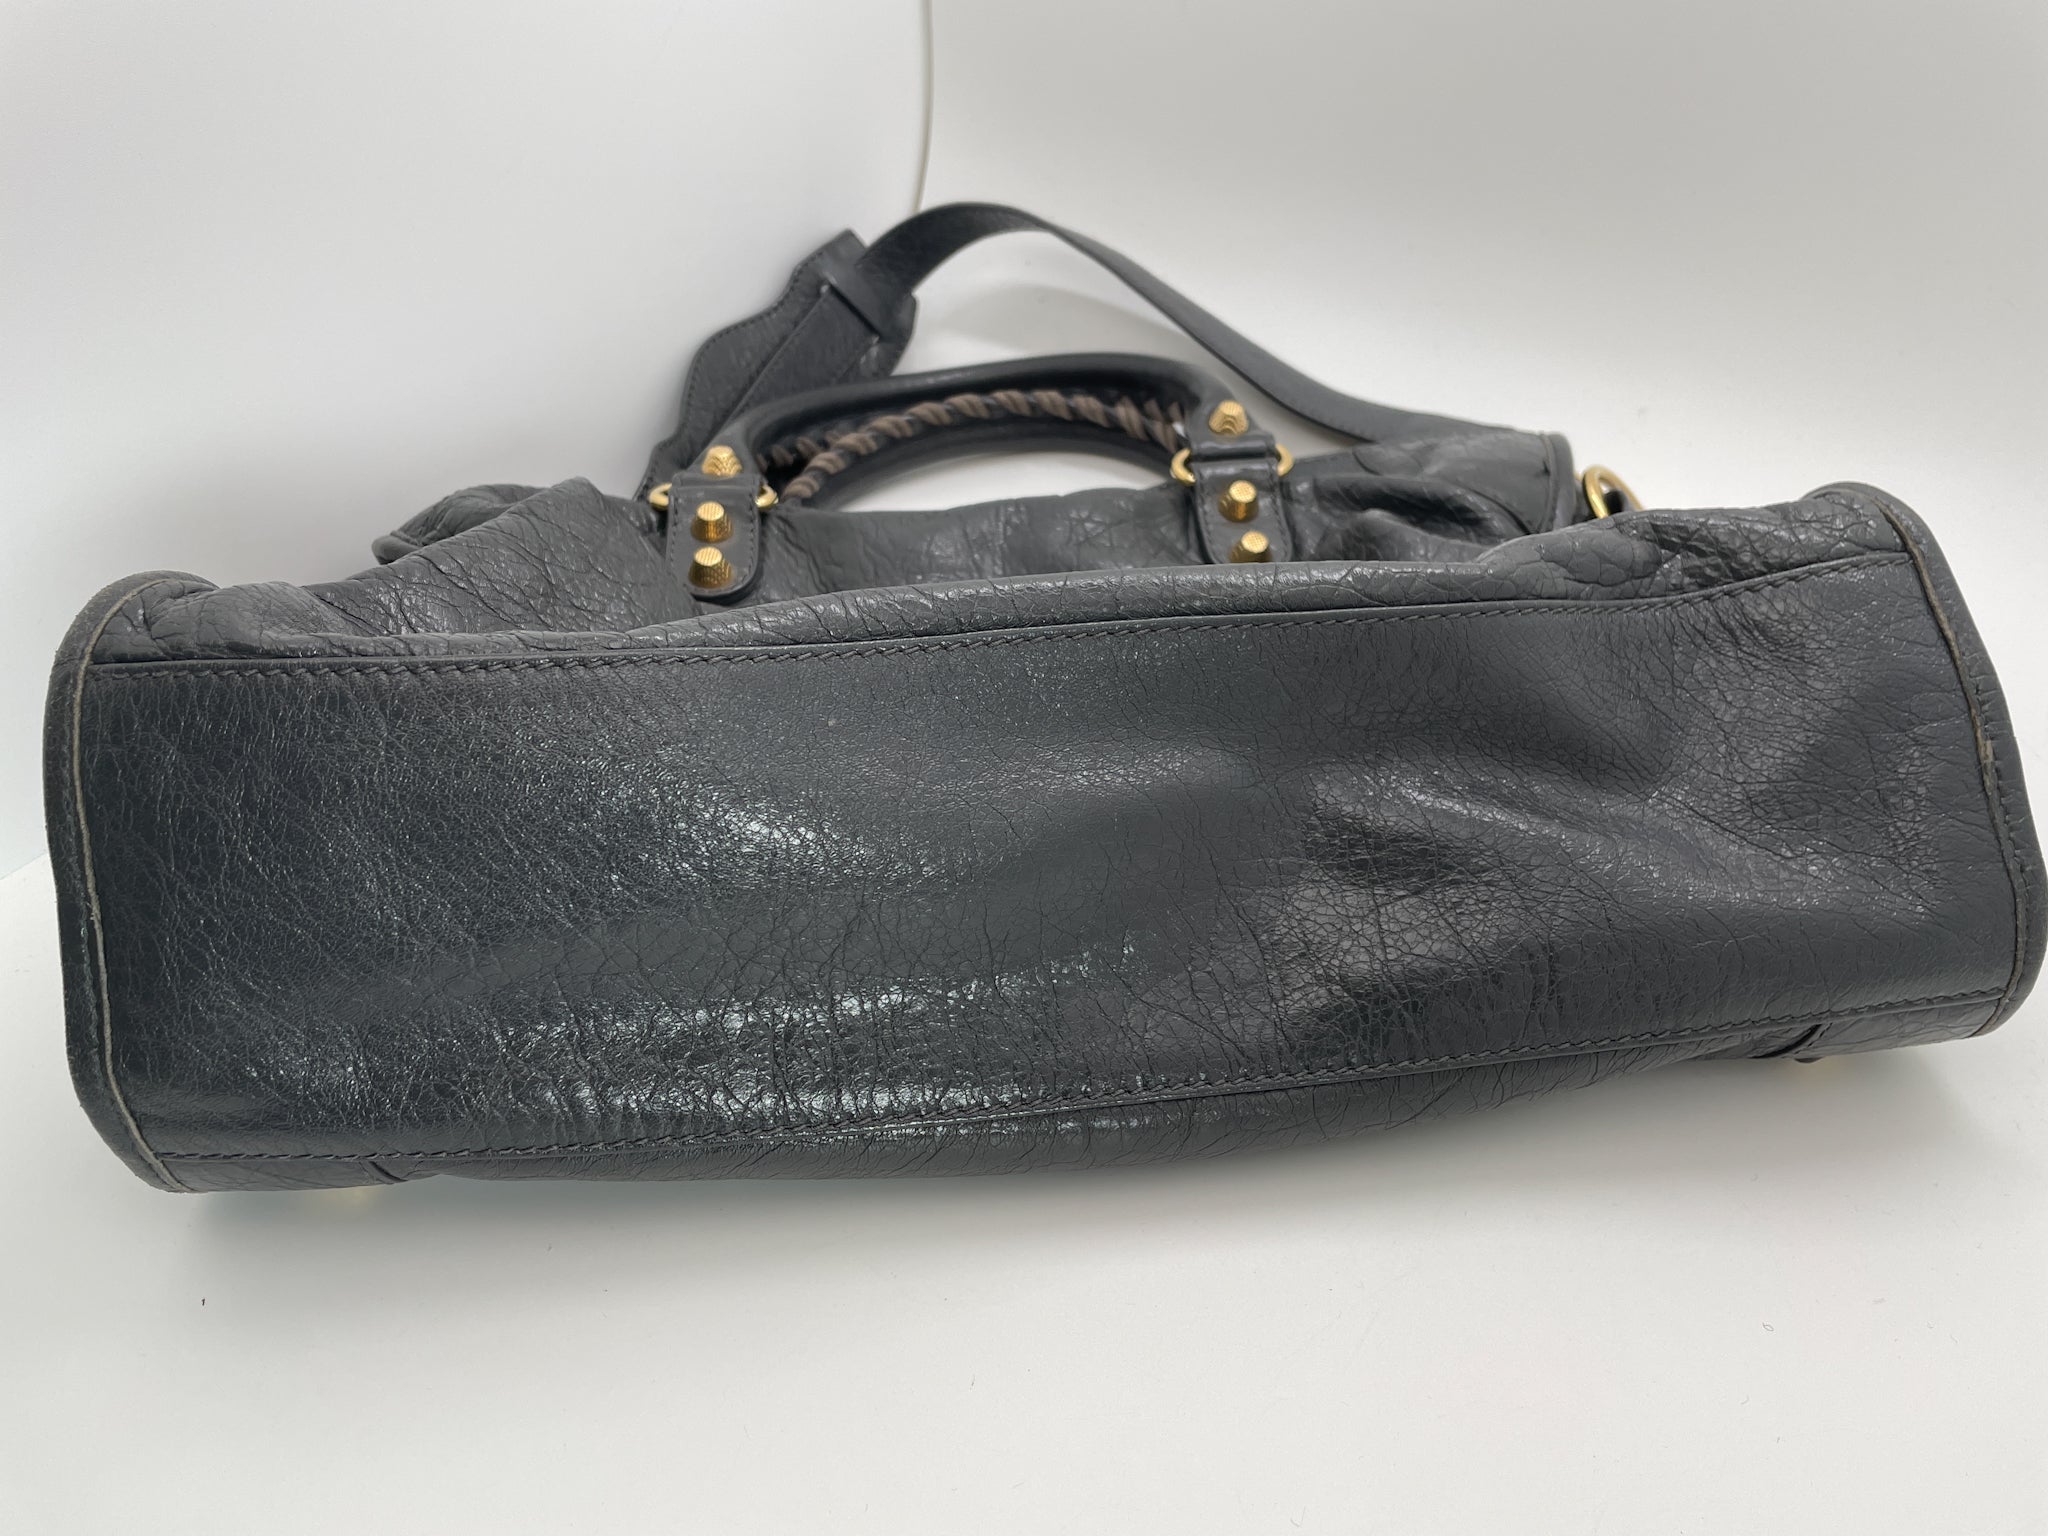 Revive your old Balenciaga bag at KAYALEATHERS now   Brand Balenciaga  𝐊𝐀𝐘𝐀 𝐋𝐄𝐀𝐓𝐇𝐄𝐑𝐒 Premium Bag  Shoes Spa  One Price includes All   Instagram